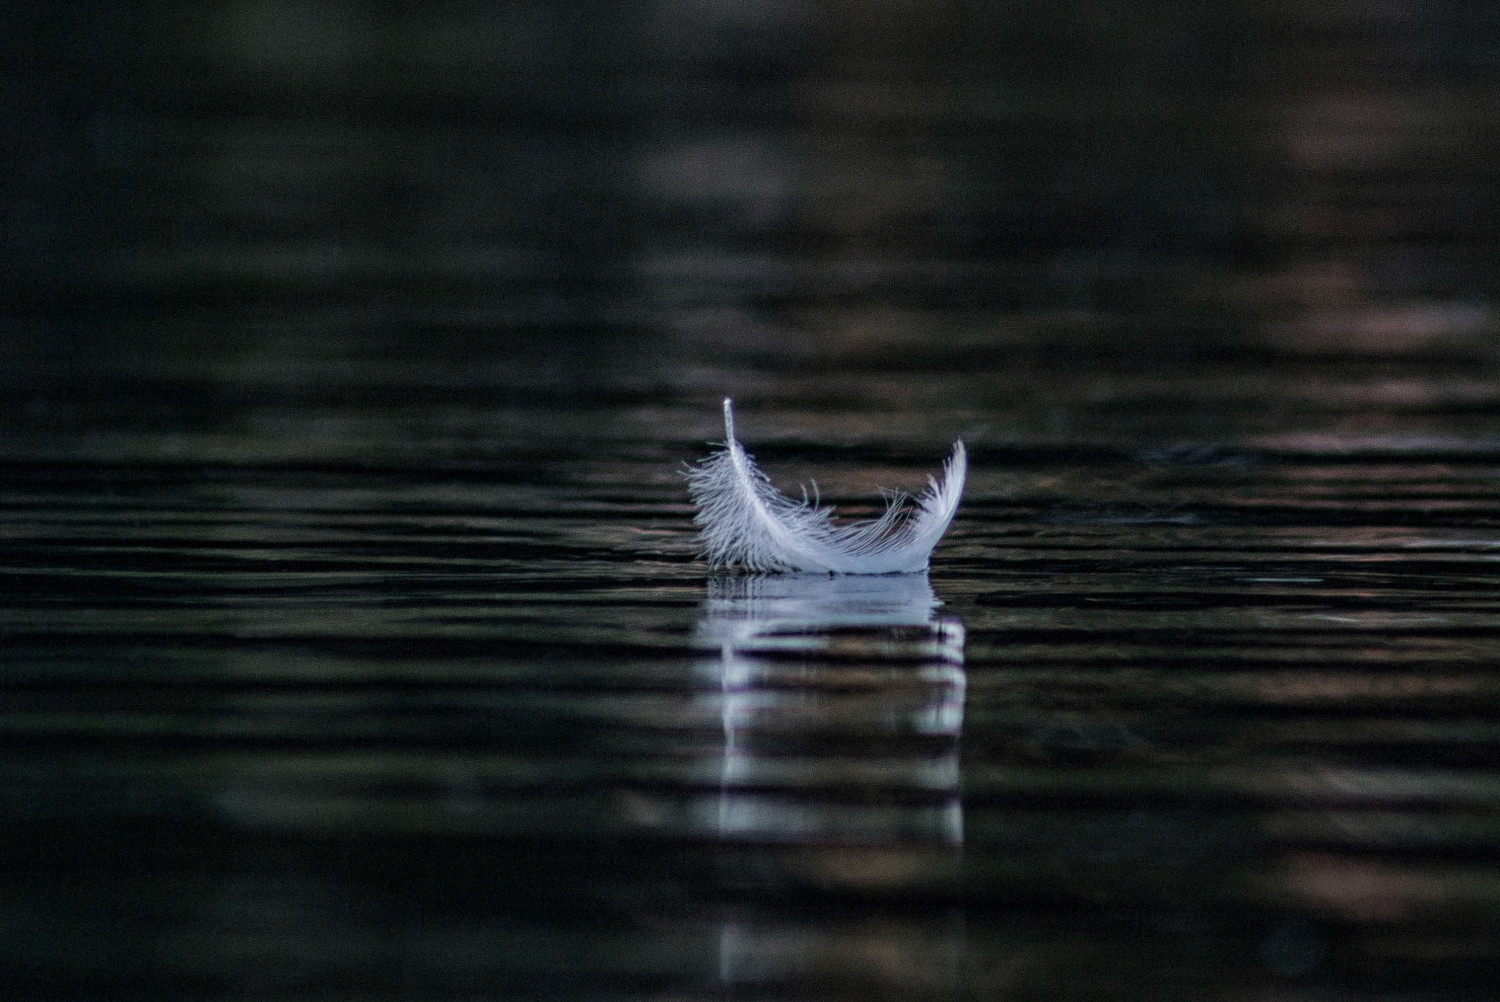 Image of a feather floating on water